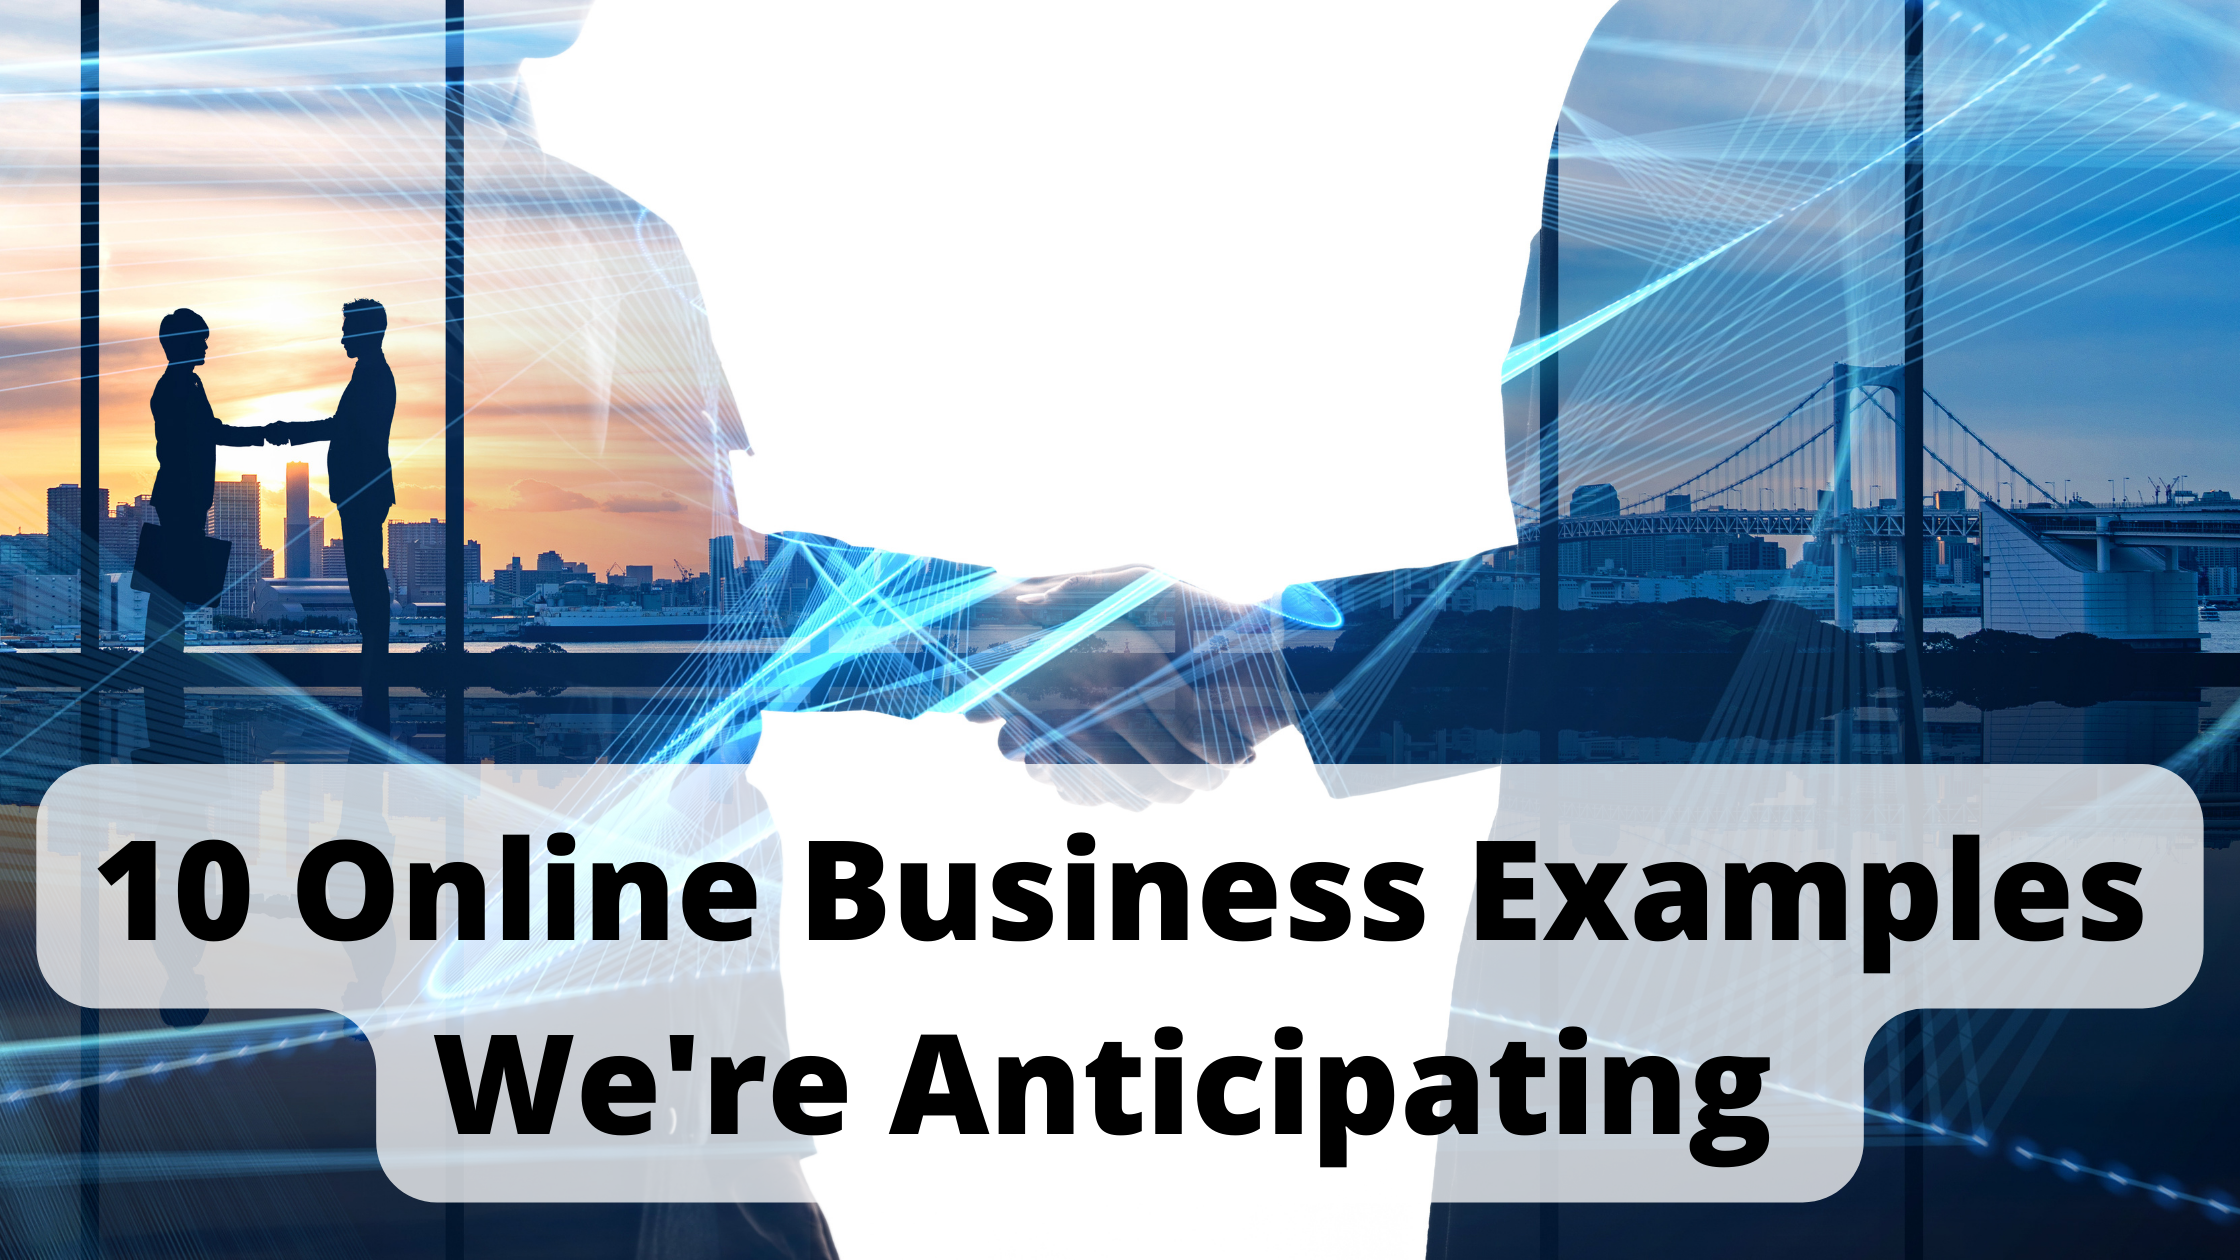 10 Online Business Examples We're Anticipating